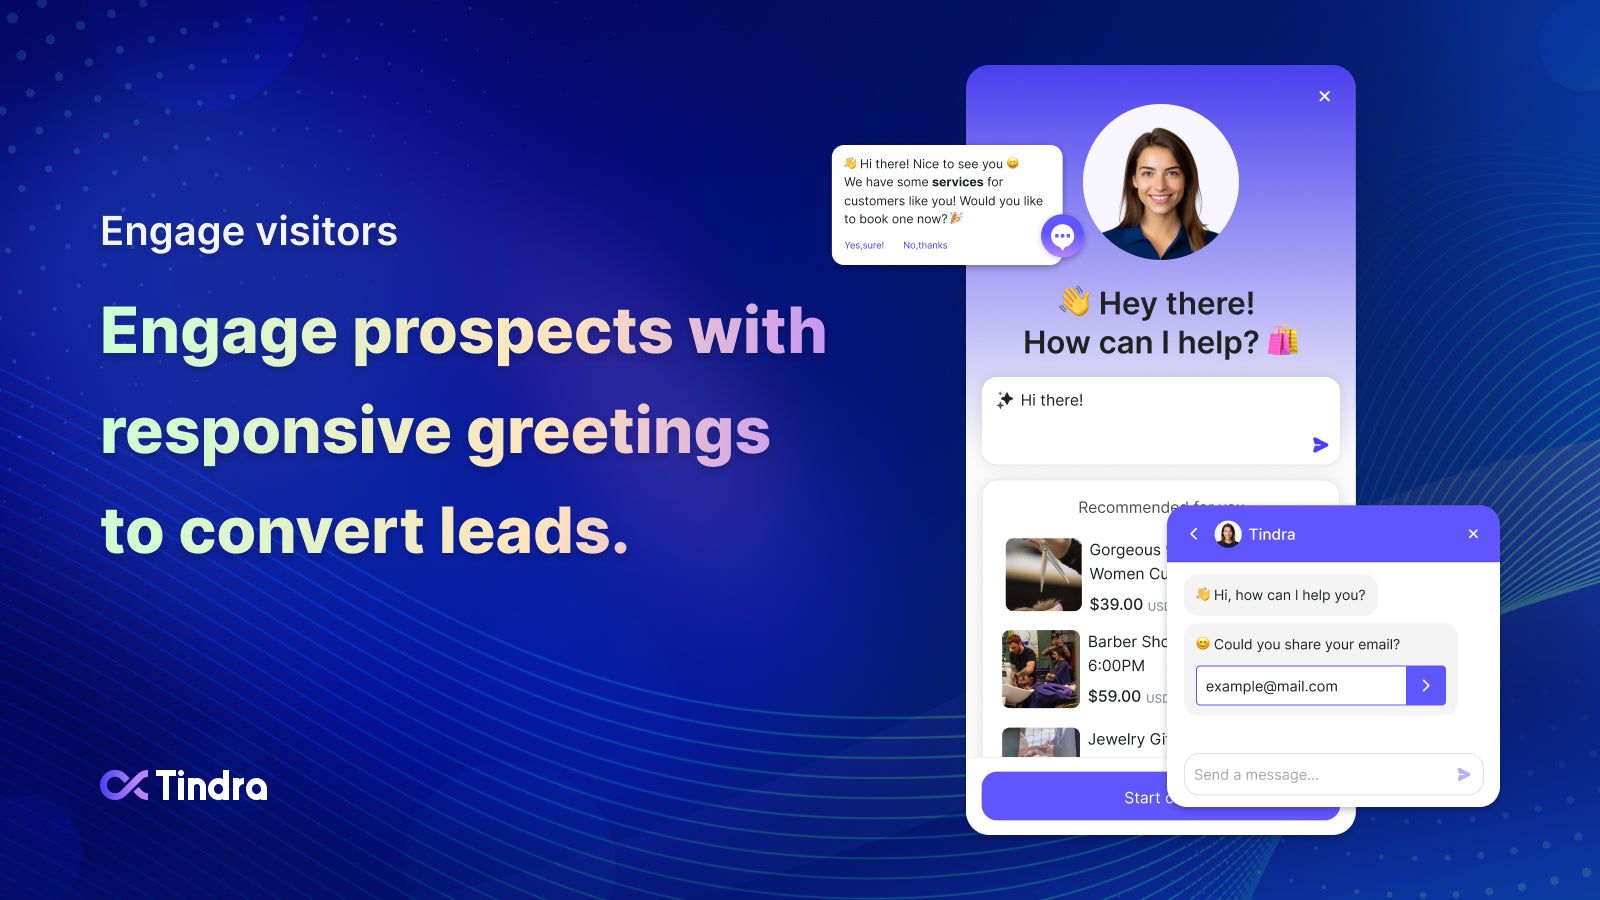 Engage prospects with responsive greetings to convert leads.